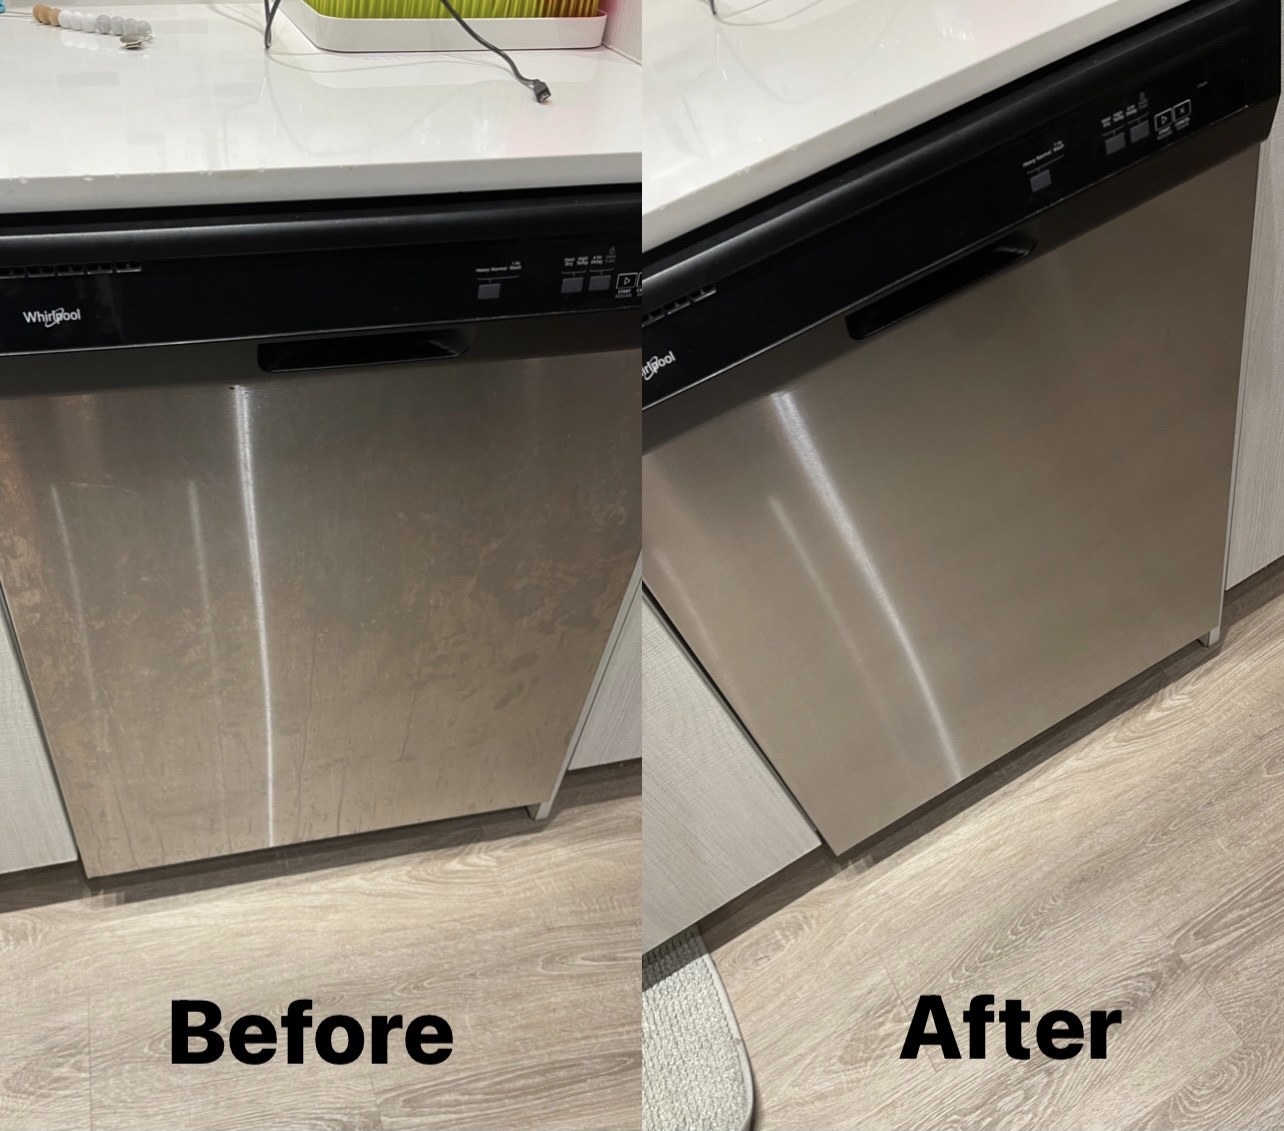 a reviewer before and after photo of a stainless steel dishwasher. it is very smudged on the before side and shiny and clean on the after side